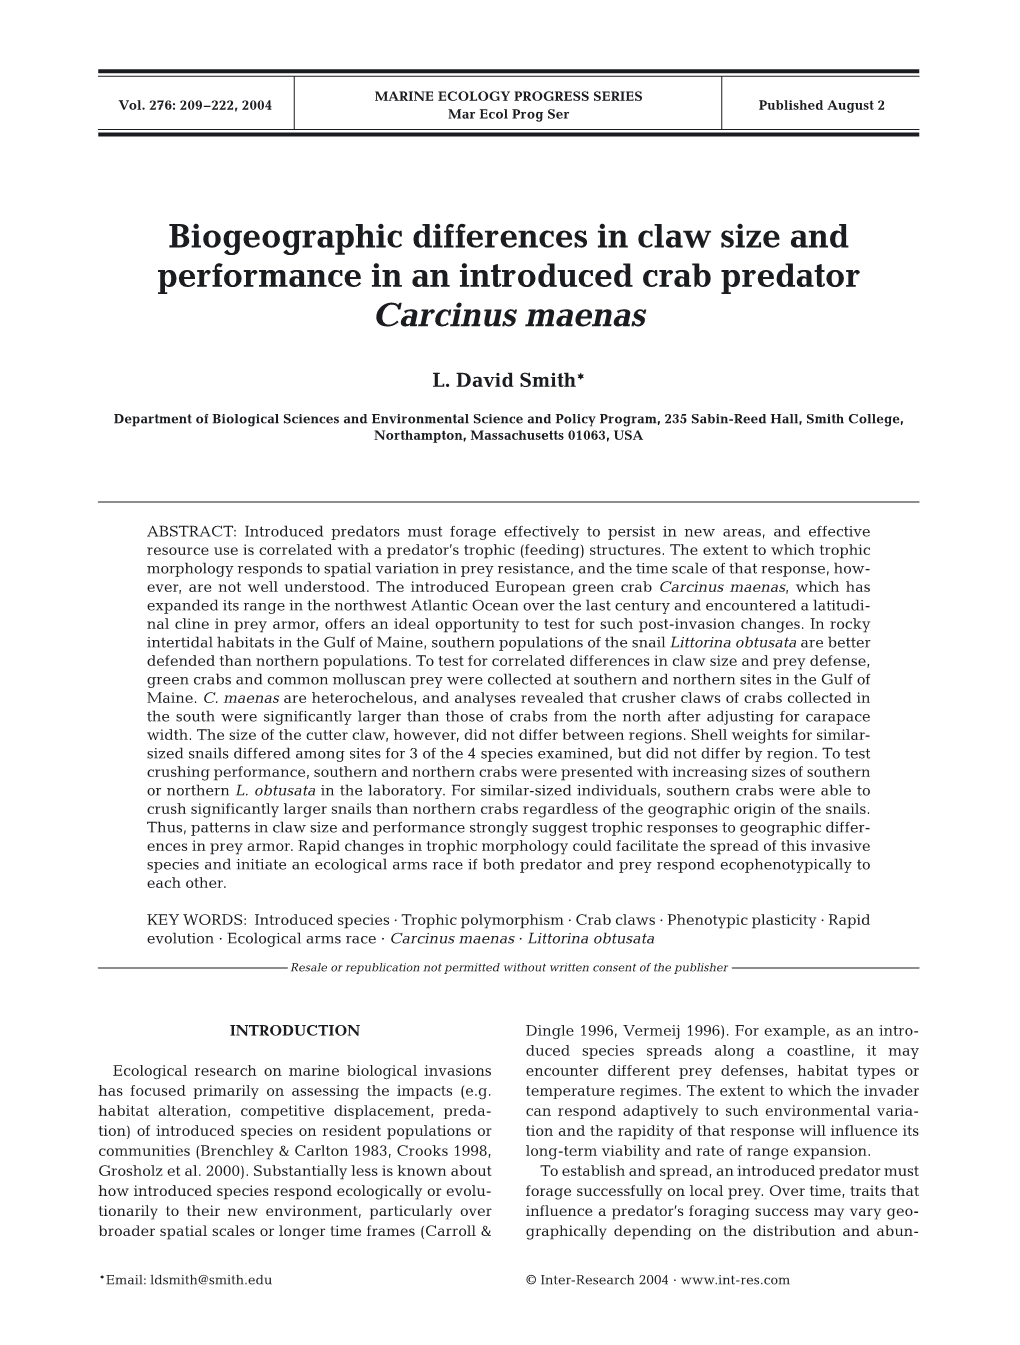 Biogeographic Differences in Claw Size and Performance in an Introduced Crab Predator Carcinus Maenas